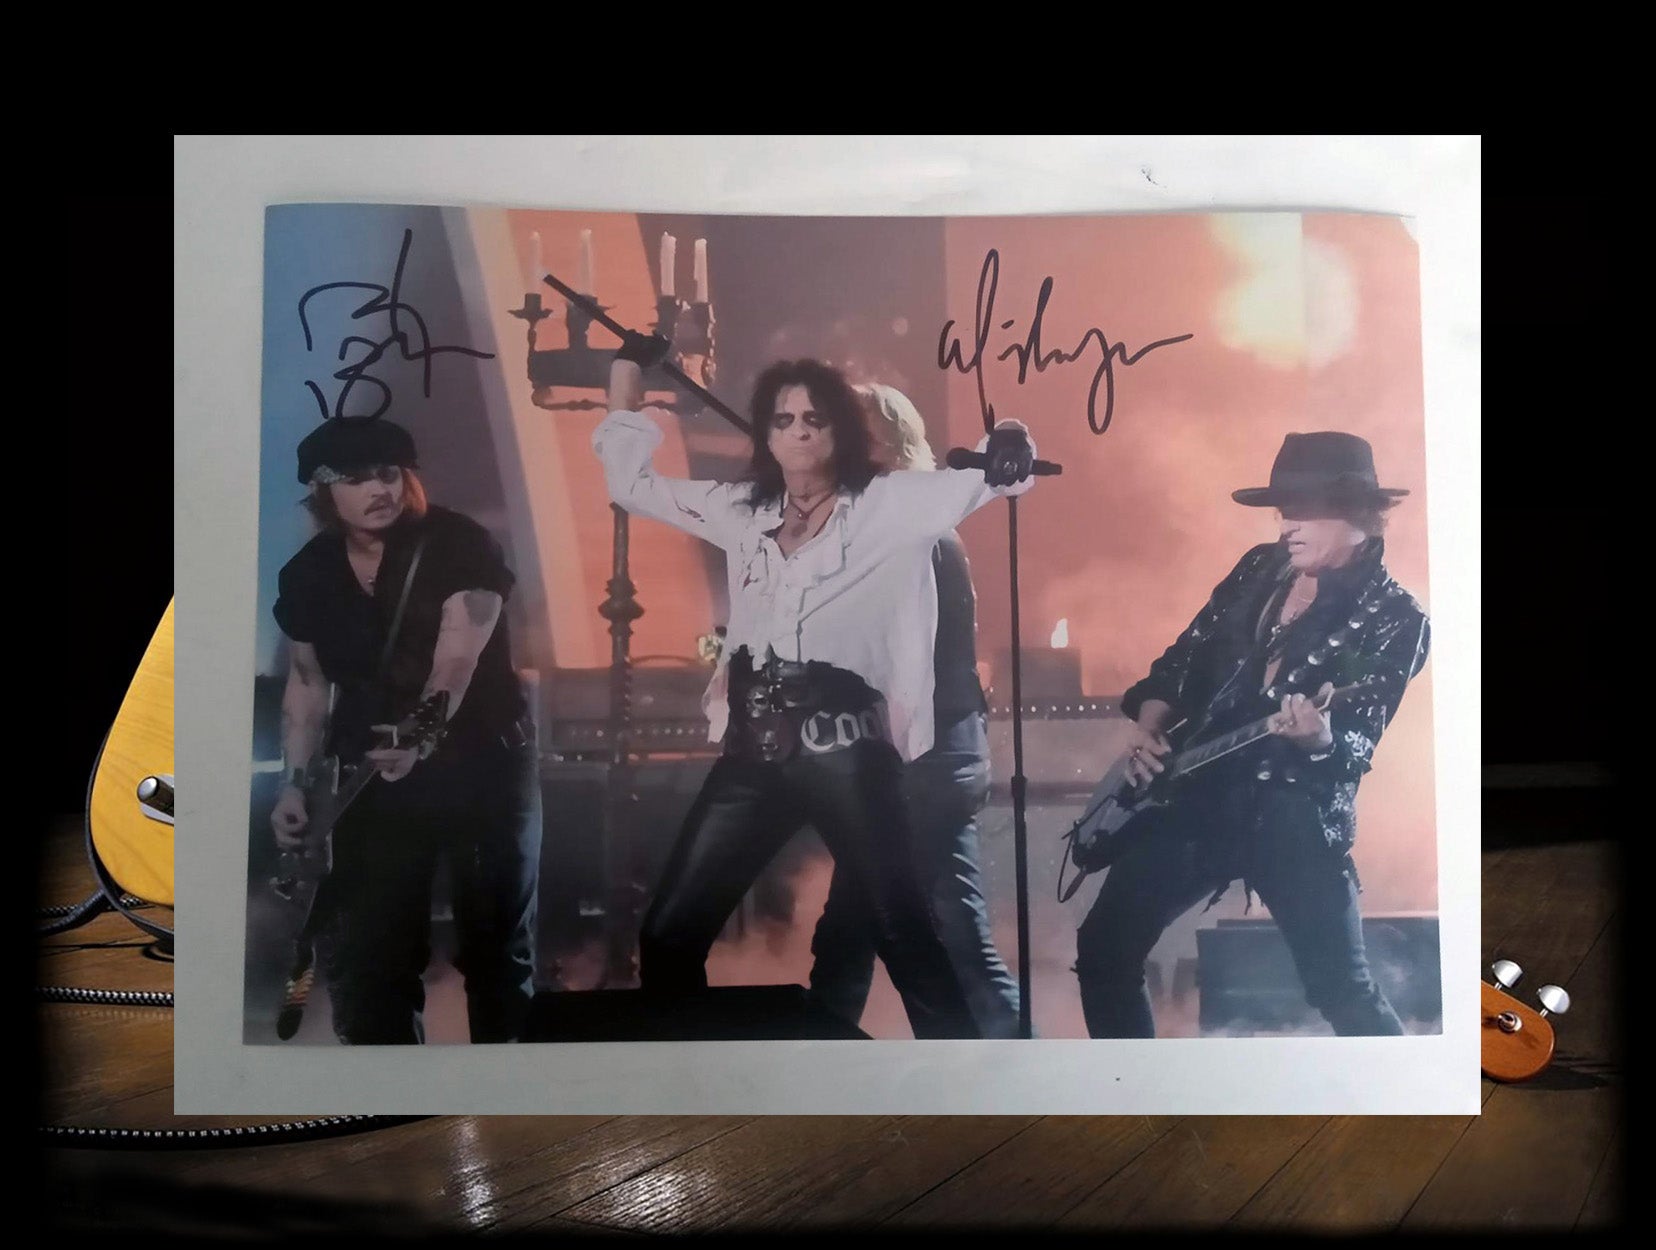 Hollywood Vampires Alice Cooper and Johnny Depp 8 x 10 photo signed with proof